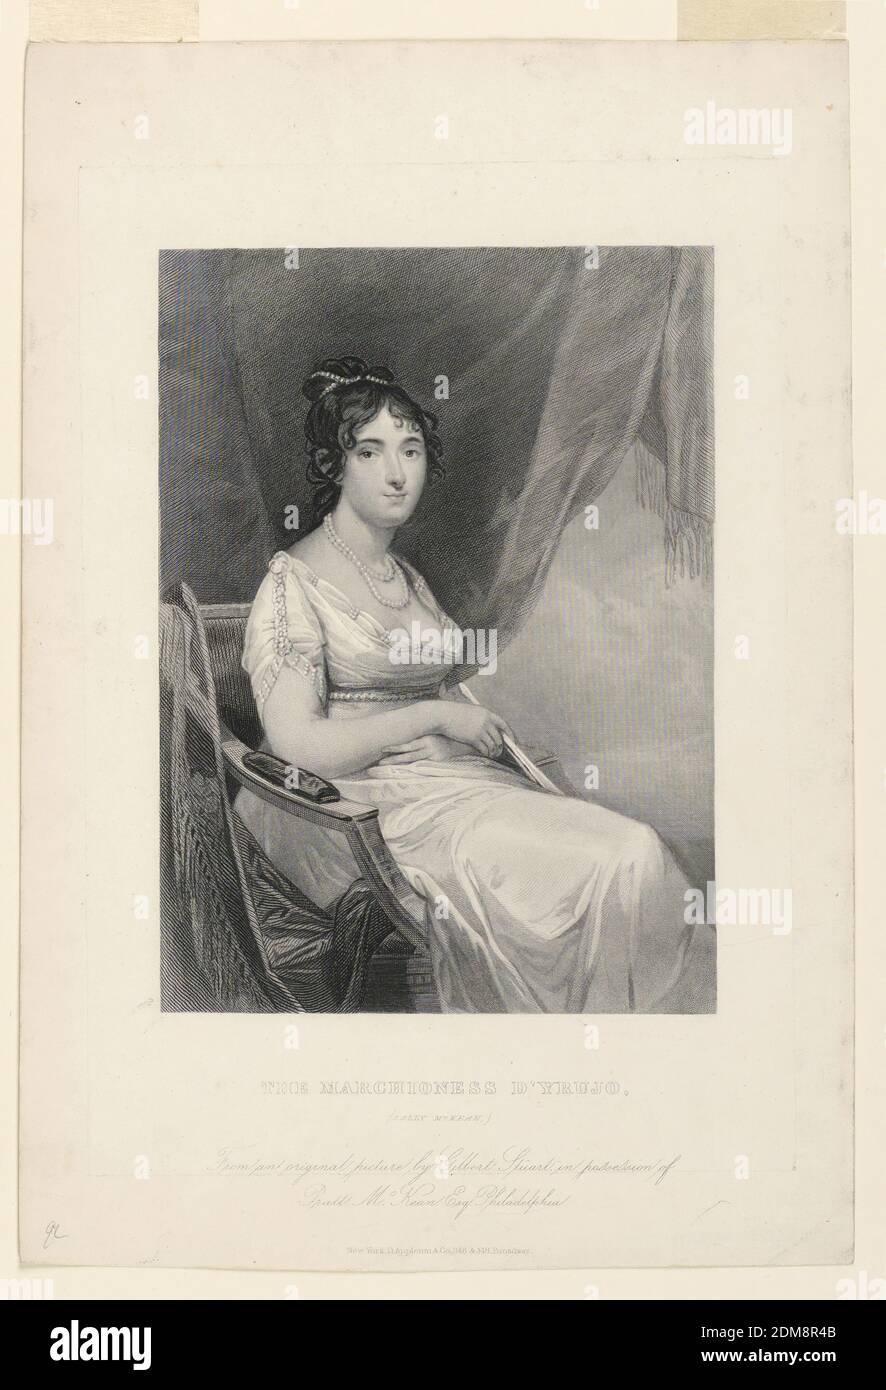 Portrait of Sally McKean, Marchioness of Yrujo, Gilbert Stuart, (American, 1755–1828), Steel engraving on paper, Three quarter length portrait of Sally McKean, Marchioness of Yrujo, shown in a white dress, seated, facing one quarter to the right. She holds a fan in her right hand. Below, sitter's name and inscription., USA, ca. 1830, Print Stock Photo